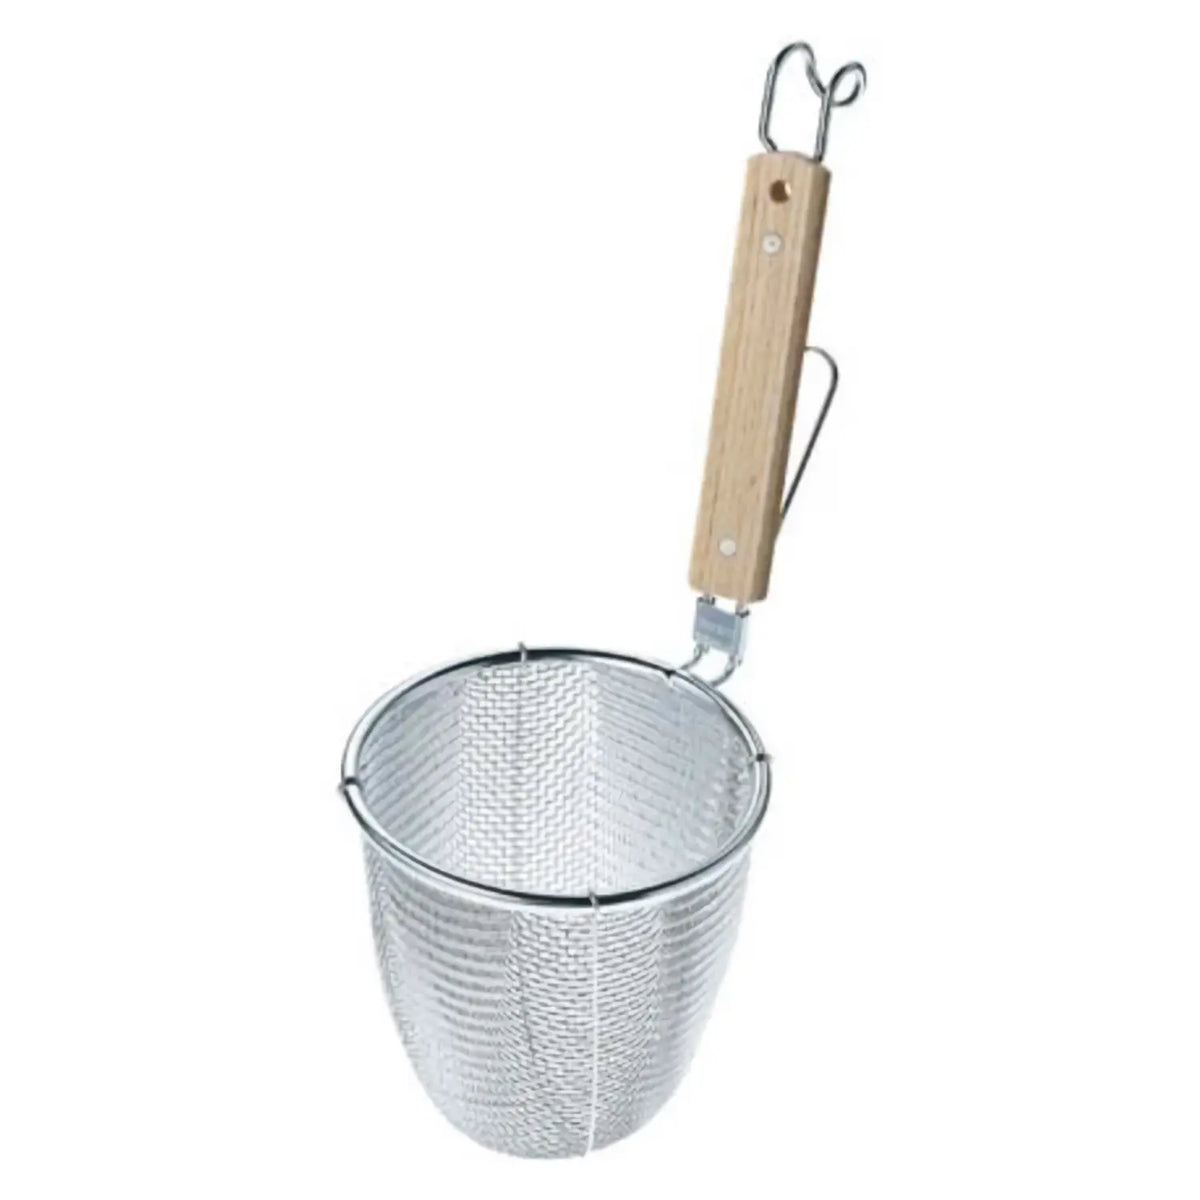 Three Snow Stainless Steel Udon Tebo Noodle Strainer Round Base with Flat Wooden Handle